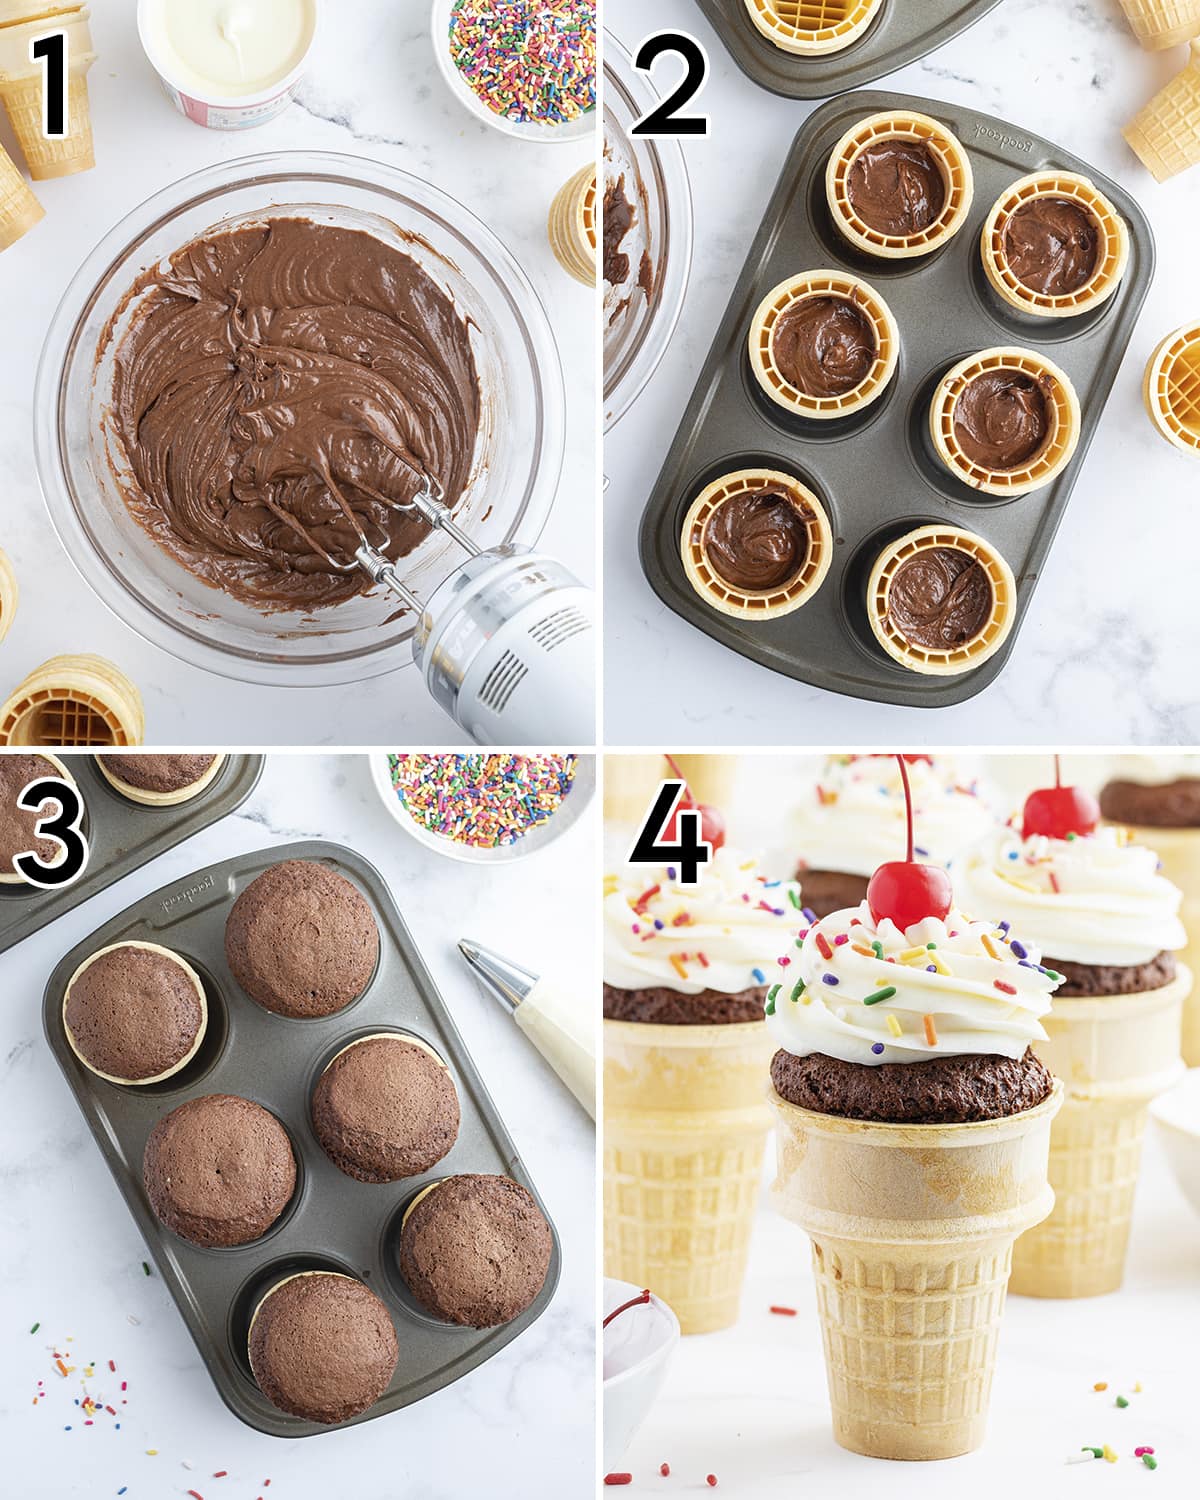 A collage of 4 photos showing the steps of how to make ice cream cone cupcakes.